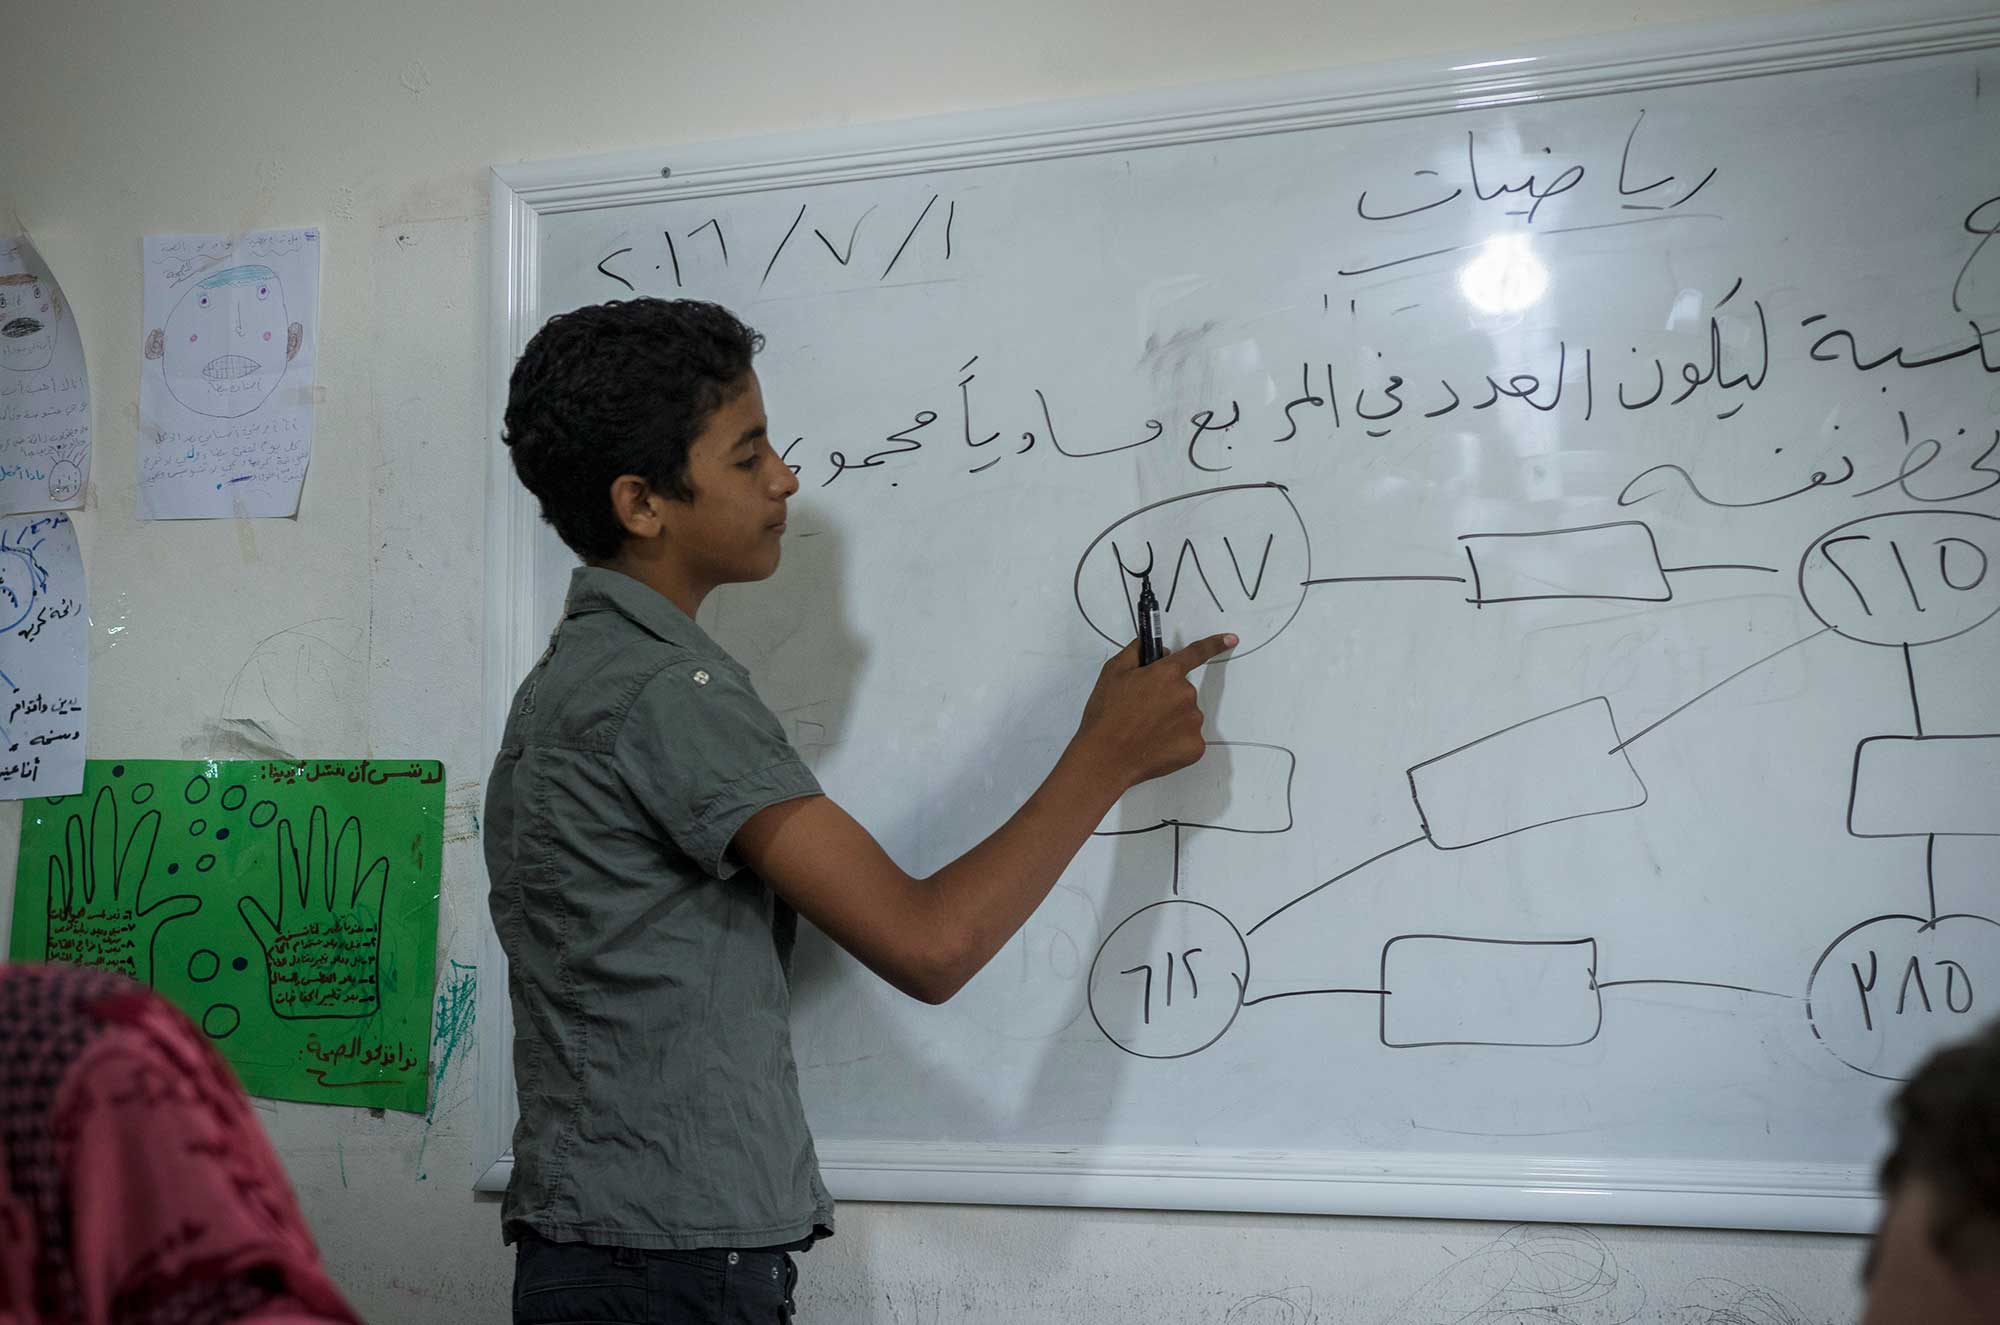 Abed is a 14-year-old Syrian refugee from Damascus. He's lived in Bhannine for four years and has had trouble going back to school. "What I learn here helps me keep up in school. My math skills are great now!" he says.